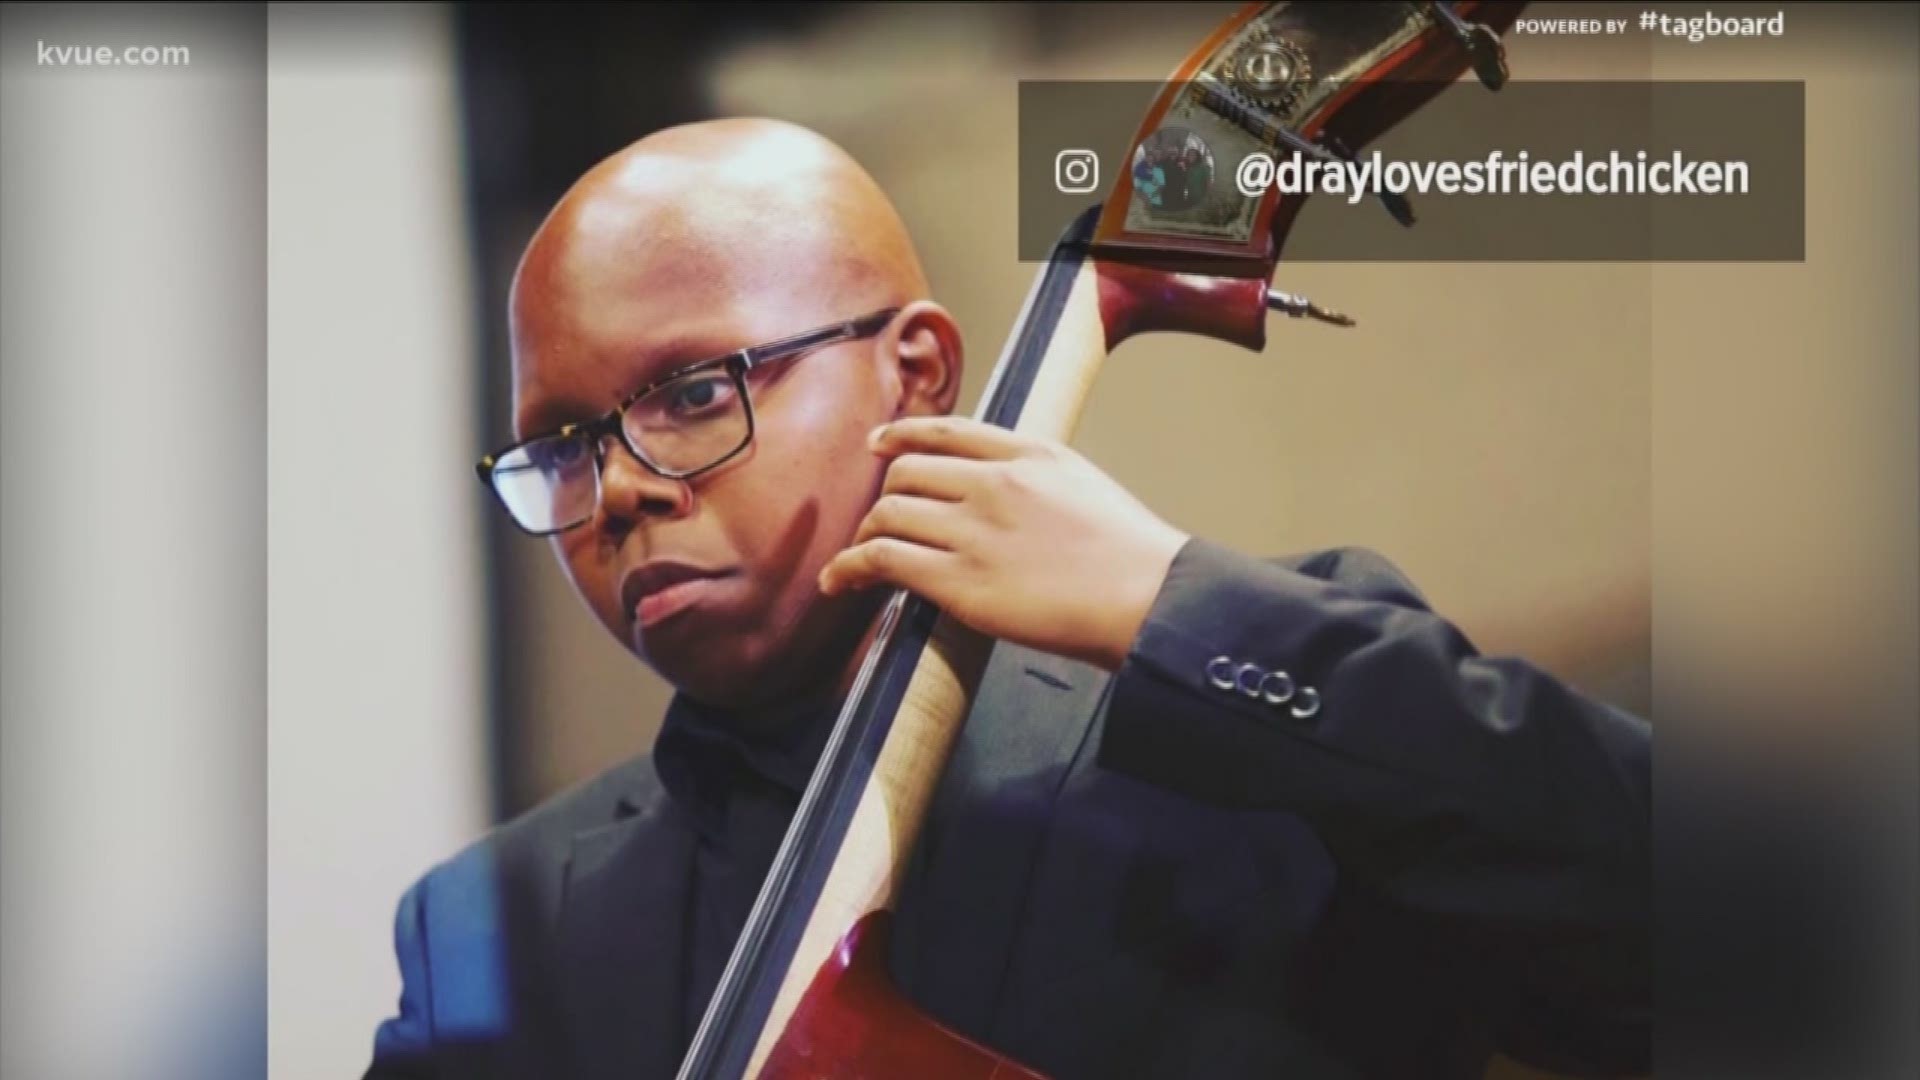 On Sunday, the city of Austin remembered Draylen Mason – the 17-year-old who died last March during the bombings.